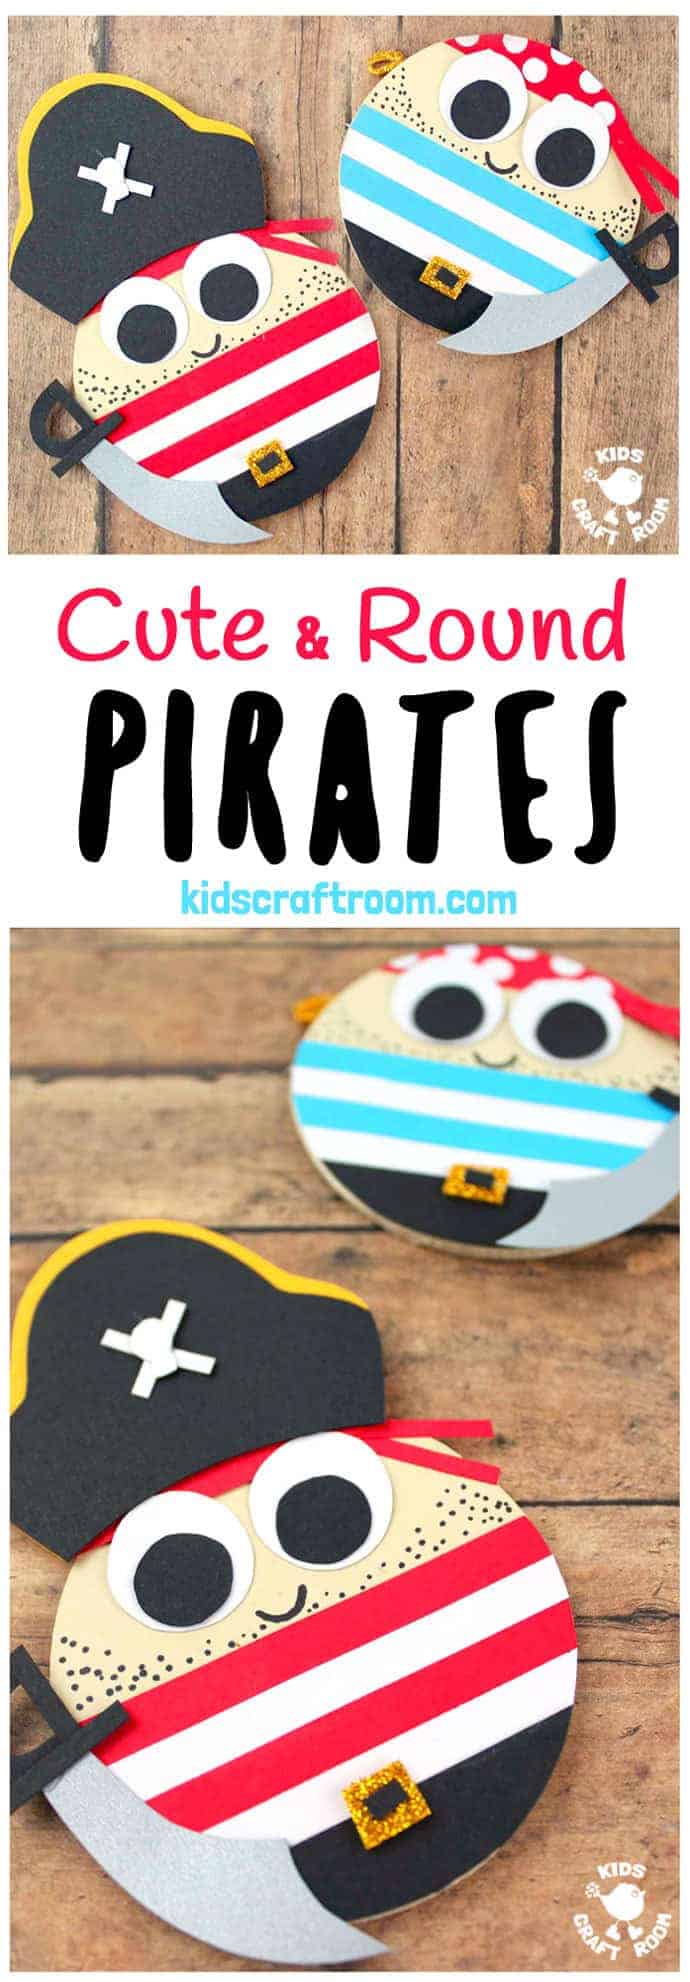 CUTE ROUND PIRATE CRAFT - Shiver me timbers this pirate craft idea is easy to make and looks fantastic. You can make a pirate captain or members of the crew and each is adorable with their nautical stripes and shiny cutlasses! A fantastic Summer kids craft and perfect for International Talk Like a Pirate Day too! #pirate #pirates #talklikeapirate #kidscrafts #piratecrafts #Summercrafs #oceancrafts #kidsactivities #kidscraftroom